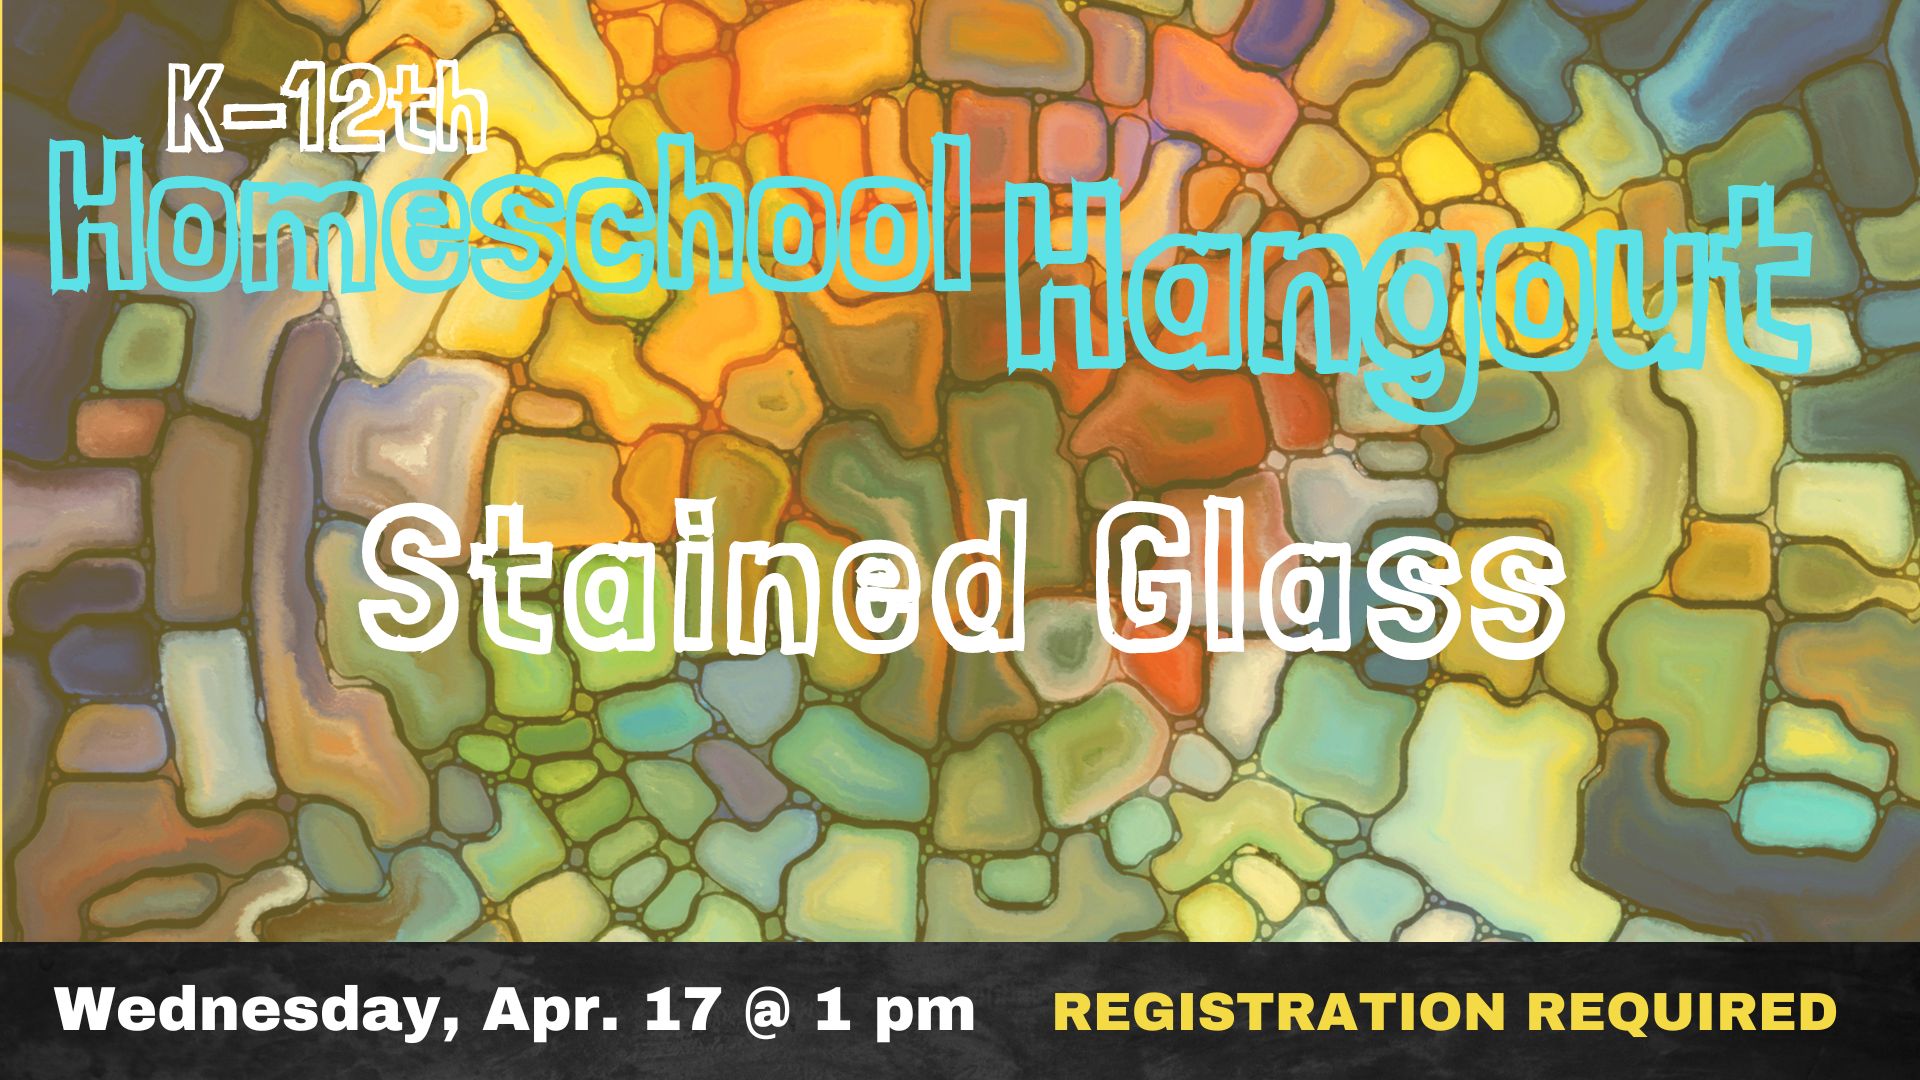 K-12th Homeschool Hangout Stained Glass.  Registration required.  April 17 at 1:00.